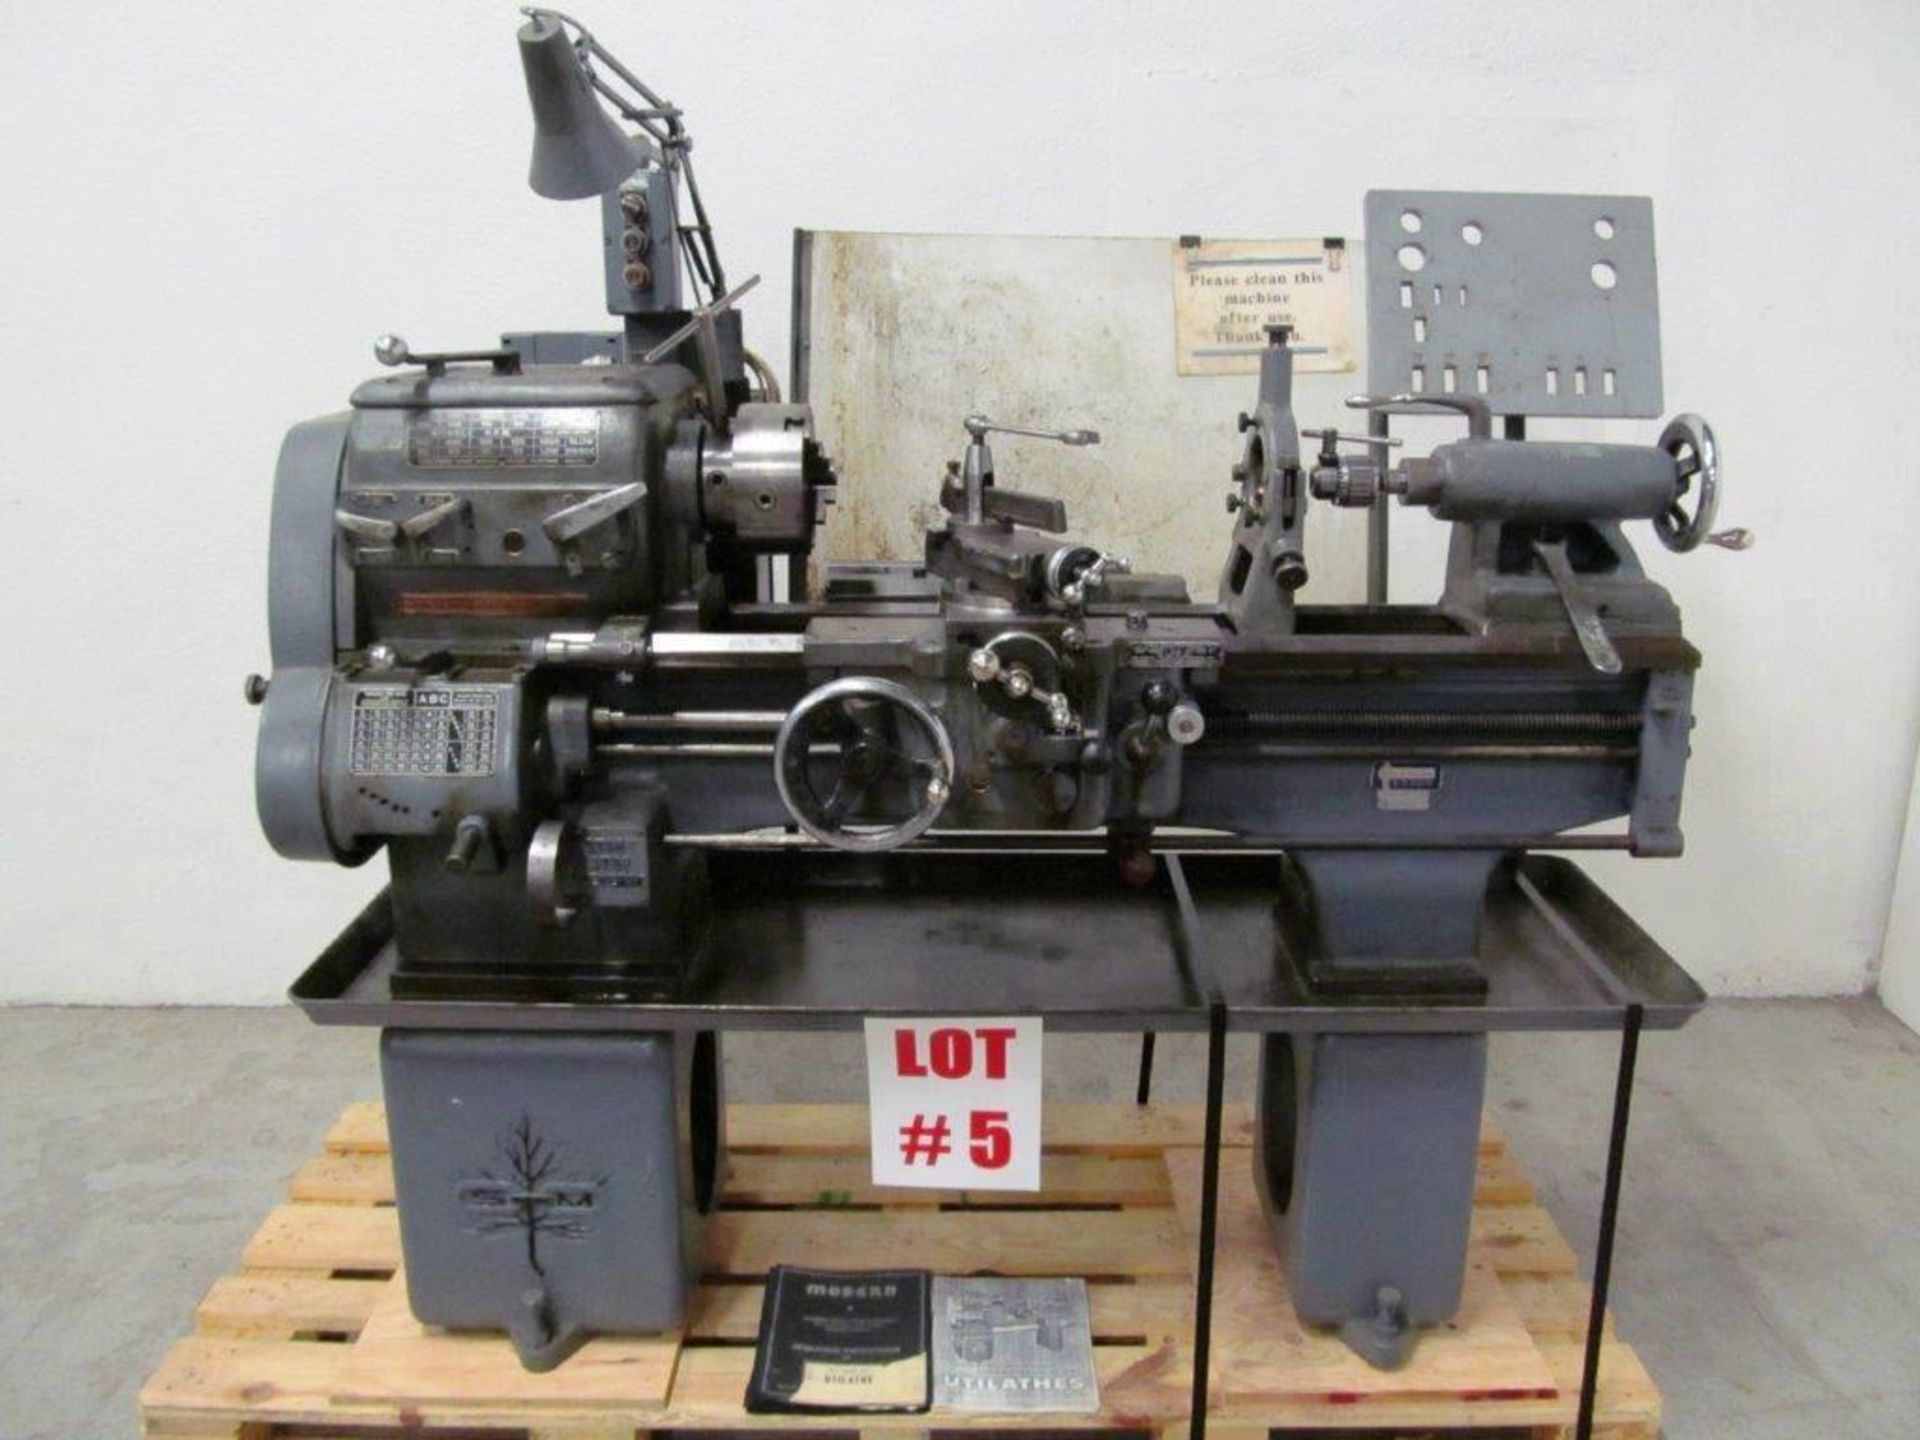 STANDARD MODERN TOOL ROOM LATHE, 14'' SWING X @30-36'' CENTERS SPINDLE BORE: 1 1/2'', ELECTRICS - Image 2 of 9